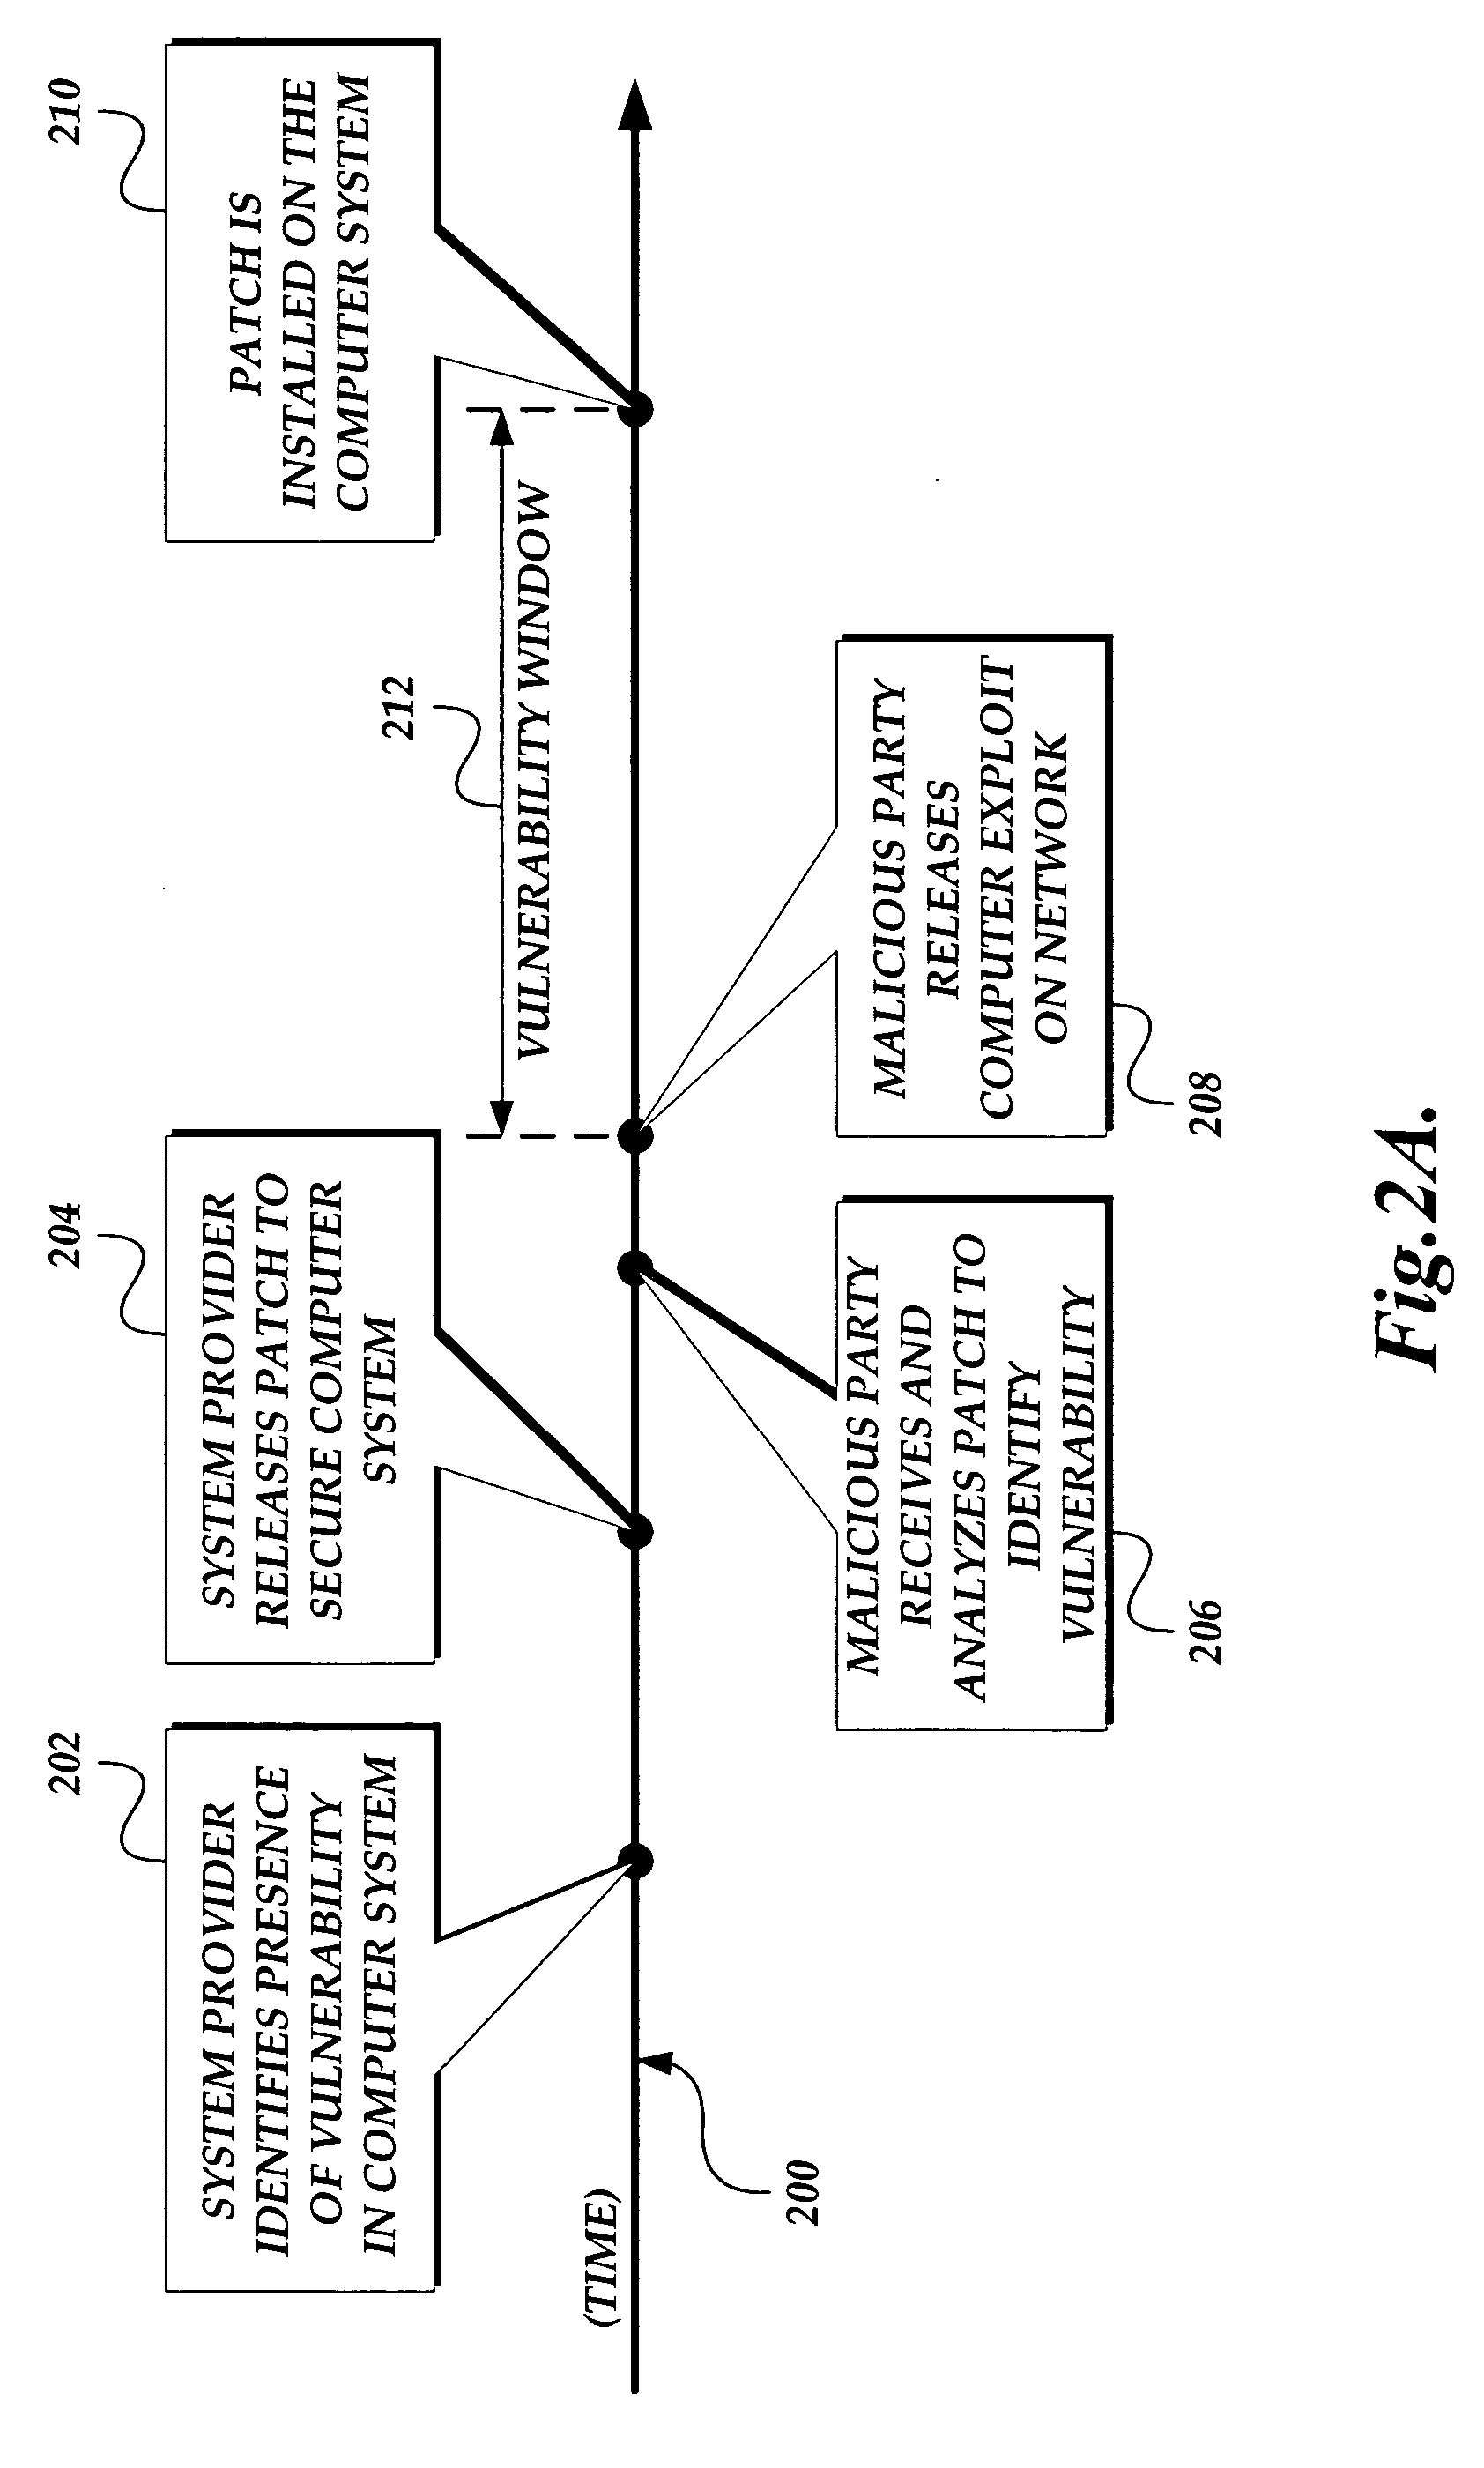 Network security device and method for protecting a computing device in a networked environment